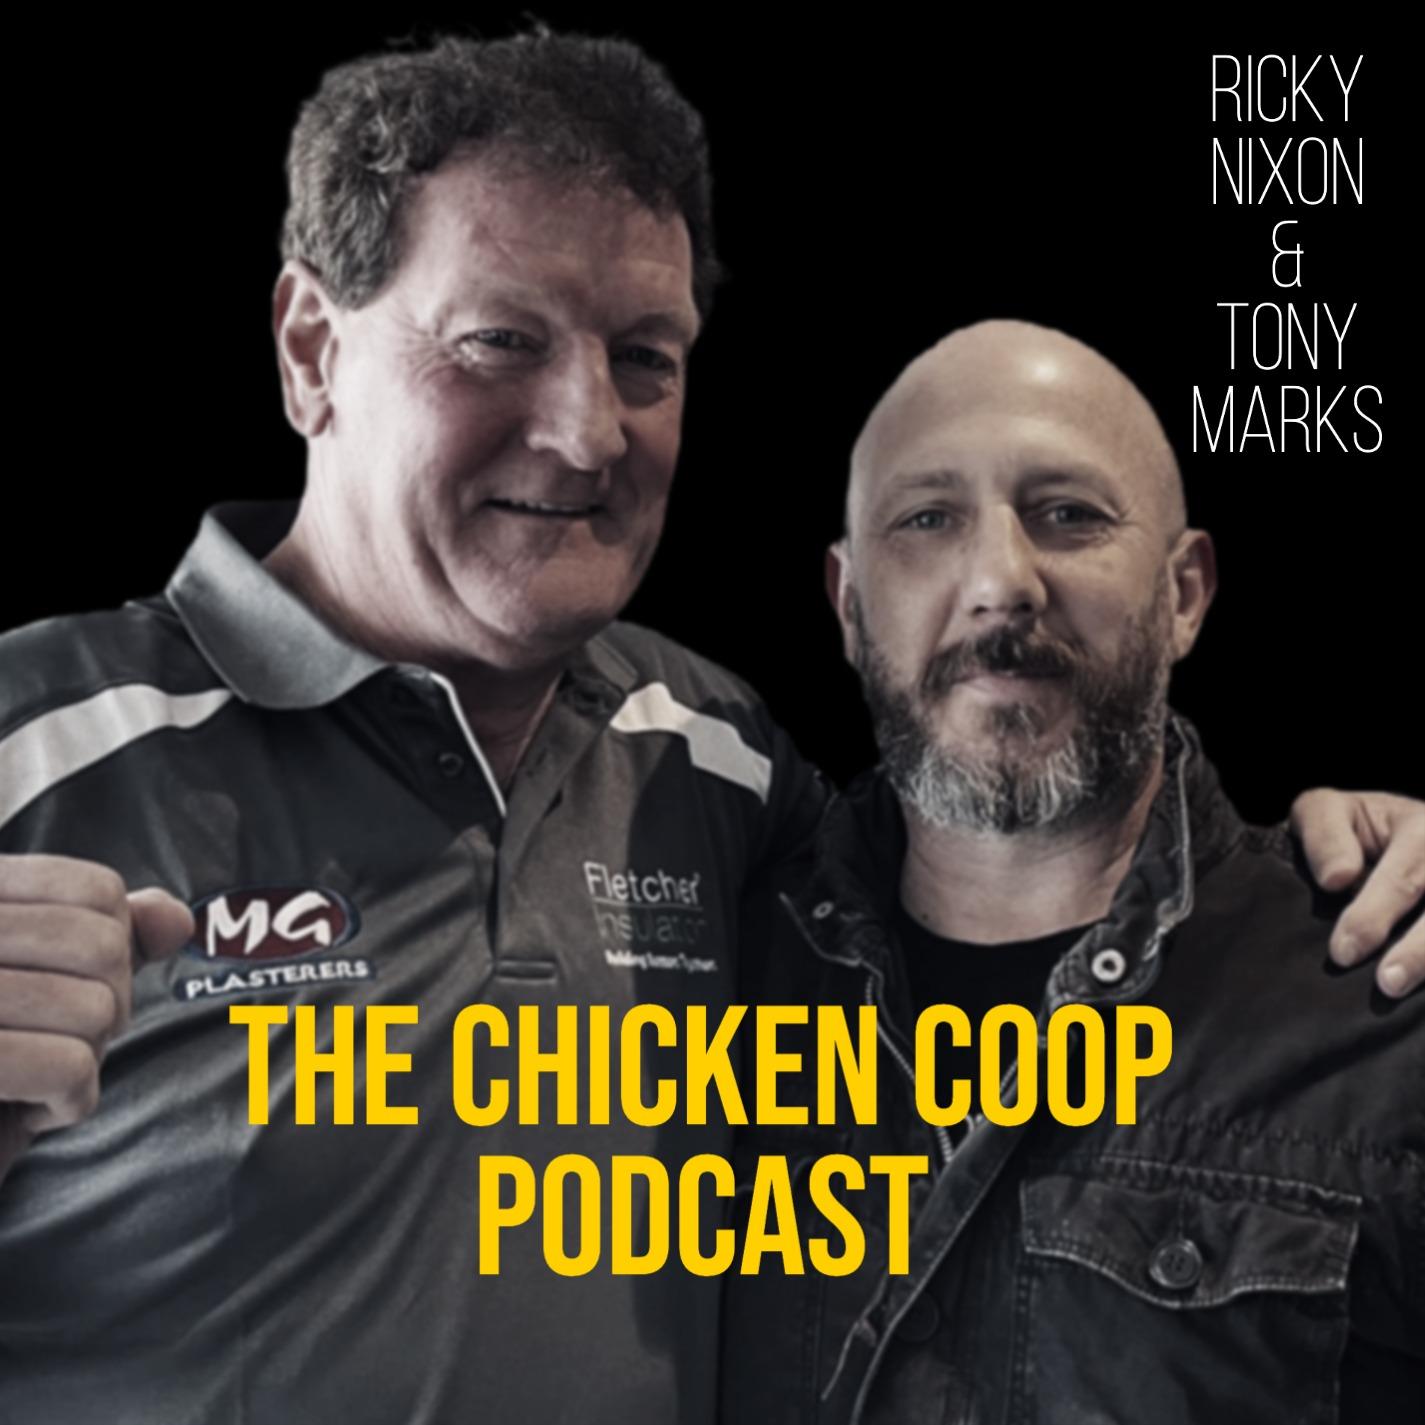 The Chicken Coop with Ricky Nixon & Tony Marks